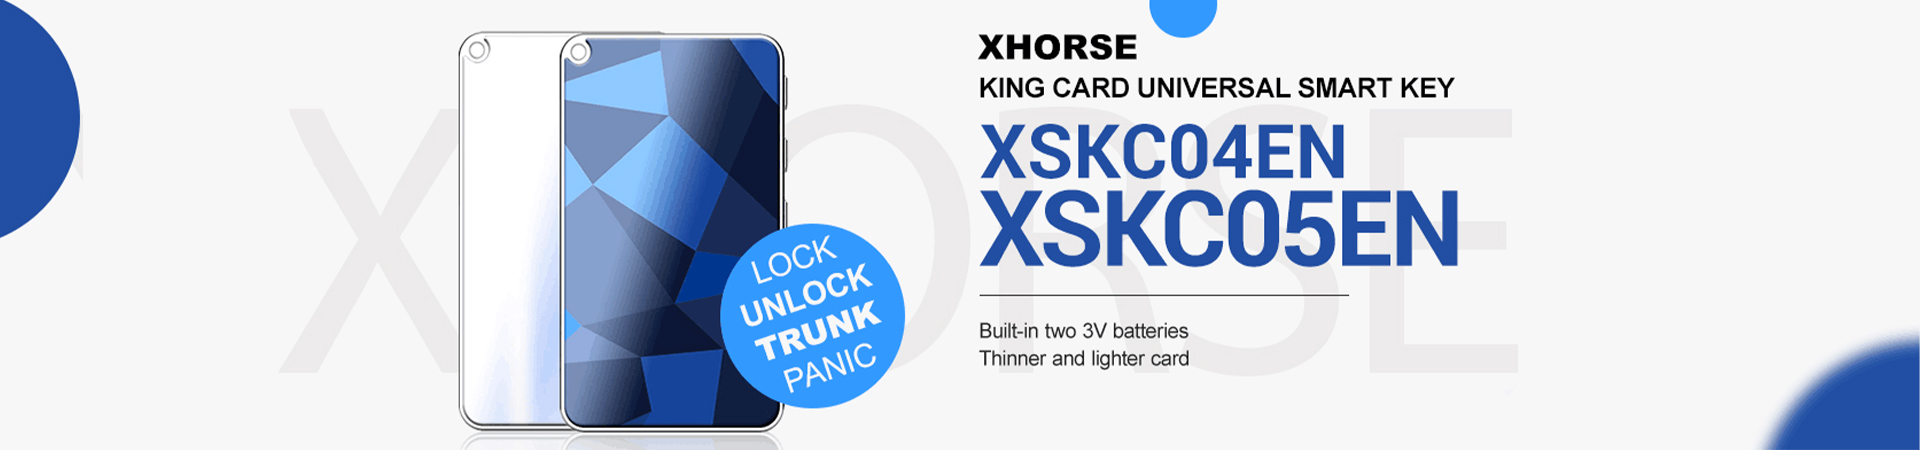 xhorse-king-card-remote